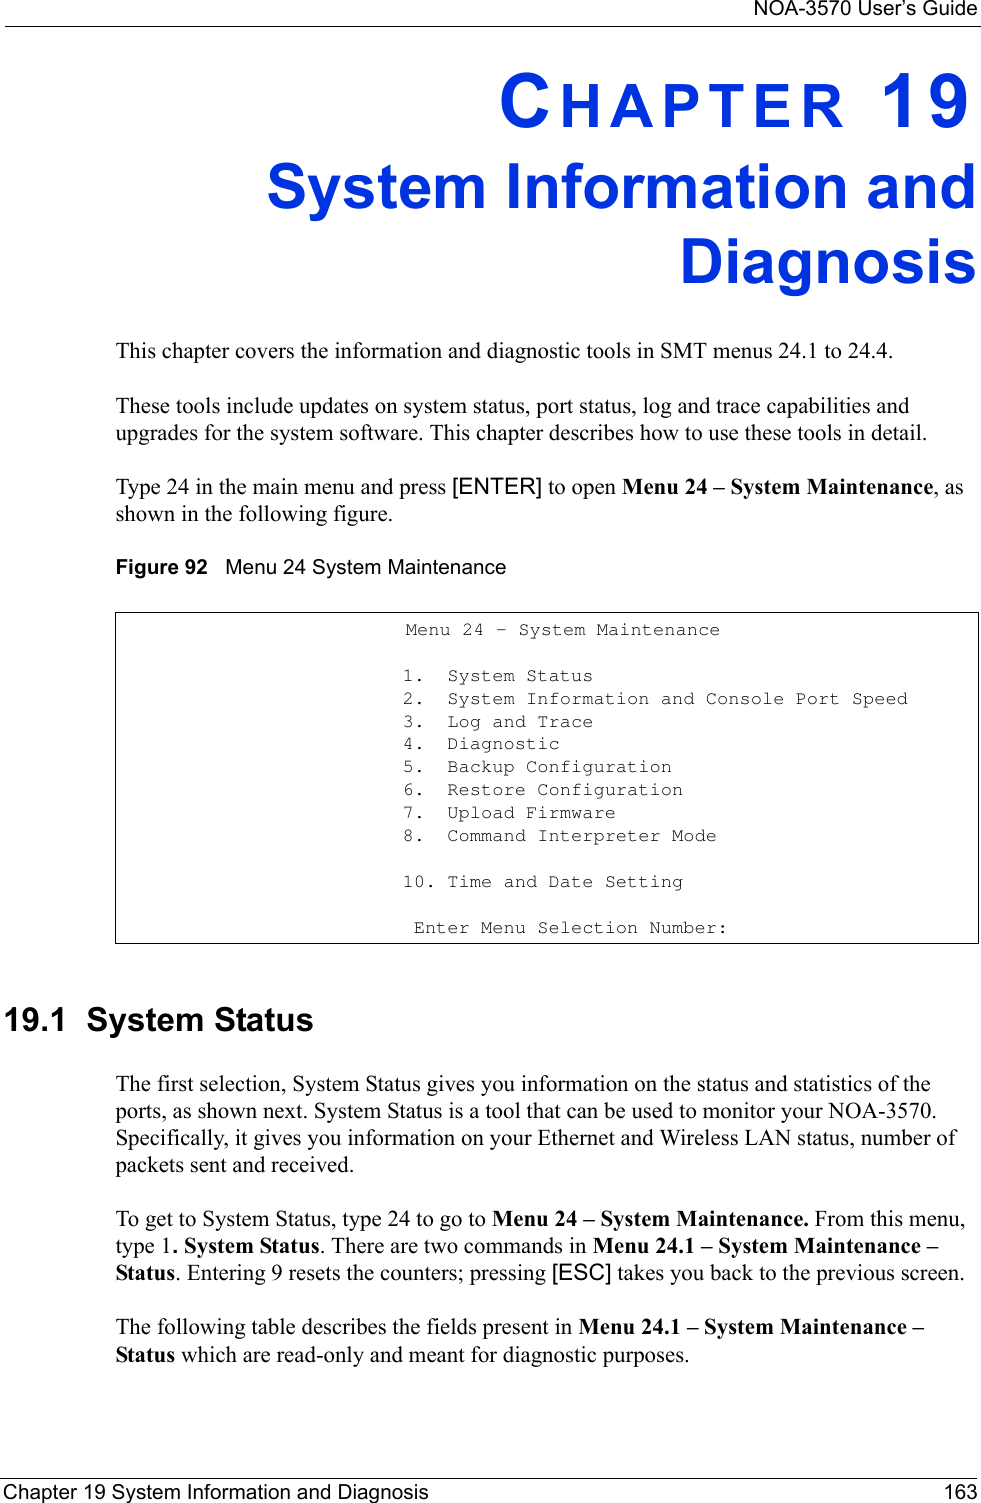 NOA-3570 User’s GuideChapter 19 System Information and Diagnosis 163CHAPTER 19System Information andDiagnosisThis chapter covers the information and diagnostic tools in SMT menus 24.1 to 24.4.These tools include updates on system status, port status, log and trace capabilities and upgrades for the system software. This chapter describes how to use these tools in detail.Type 24 in the main menu and press [ENTER] to open Menu 24 – System Maintenance, as shown in the following figure.Figure 92   Menu 24 System Maintenance19.1  System StatusThe first selection, System Status gives you information on the status and statistics of the ports, as shown next. System Status is a tool that can be used to monitor your NOA-3570. Specifically, it gives you information on your Ethernet and Wireless LAN status, number of packets sent and received.To get to System Status, type 24 to go to Menu 24 – System Maintenance. From this menu, type 1. System Status. There are two commands in Menu 24.1 – System Maintenance – Status. Entering 9 resets the counters; pressing [ESC] takes you back to the previous screen.The following table describes the fields present in Menu 24.1 – System Maintenance – Status which are read-only and meant for diagnostic purposes.                                   Menu 24 - System Maintenance                         1.  System Status                         2.  System Information and Console Port Speed                         3.  Log and Trace                         4.  Diagnostic                         5.  Backup Configuration                         6.  Restore Configuration                         7.  Upload Firmware                         8.  Command Interpreter Mode                         10. Time and Date Setting                                                   Enter Menu Selection Number: